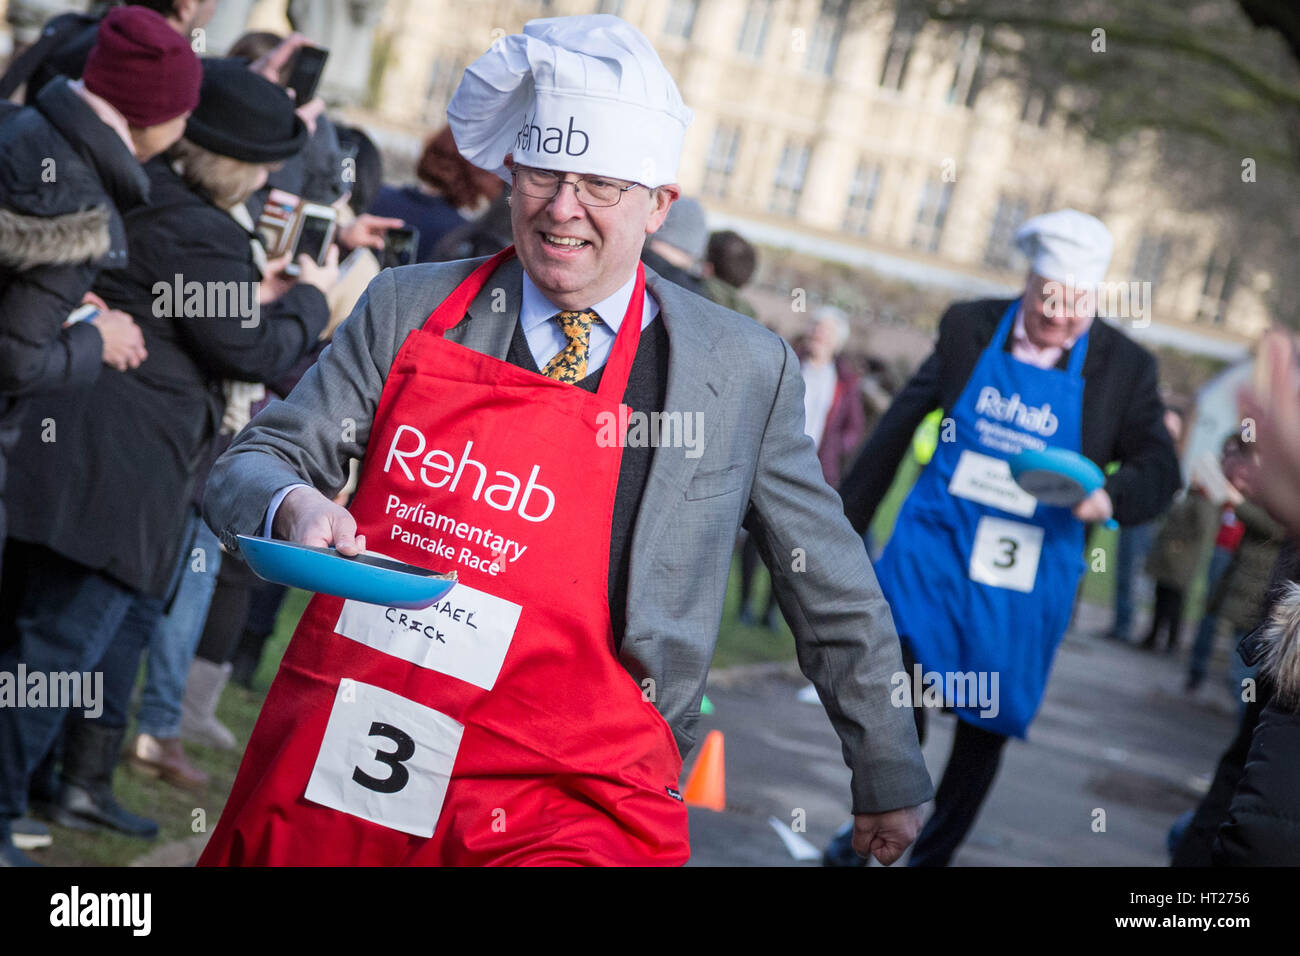 Michael Crick, Political Correspondent, Channel 4 News. MPs, Lords and Media attend the 20th Annual Rehab Parliamentary Pancake Race at Victoria Gardens in Westminster, London, UK. Stock Photo